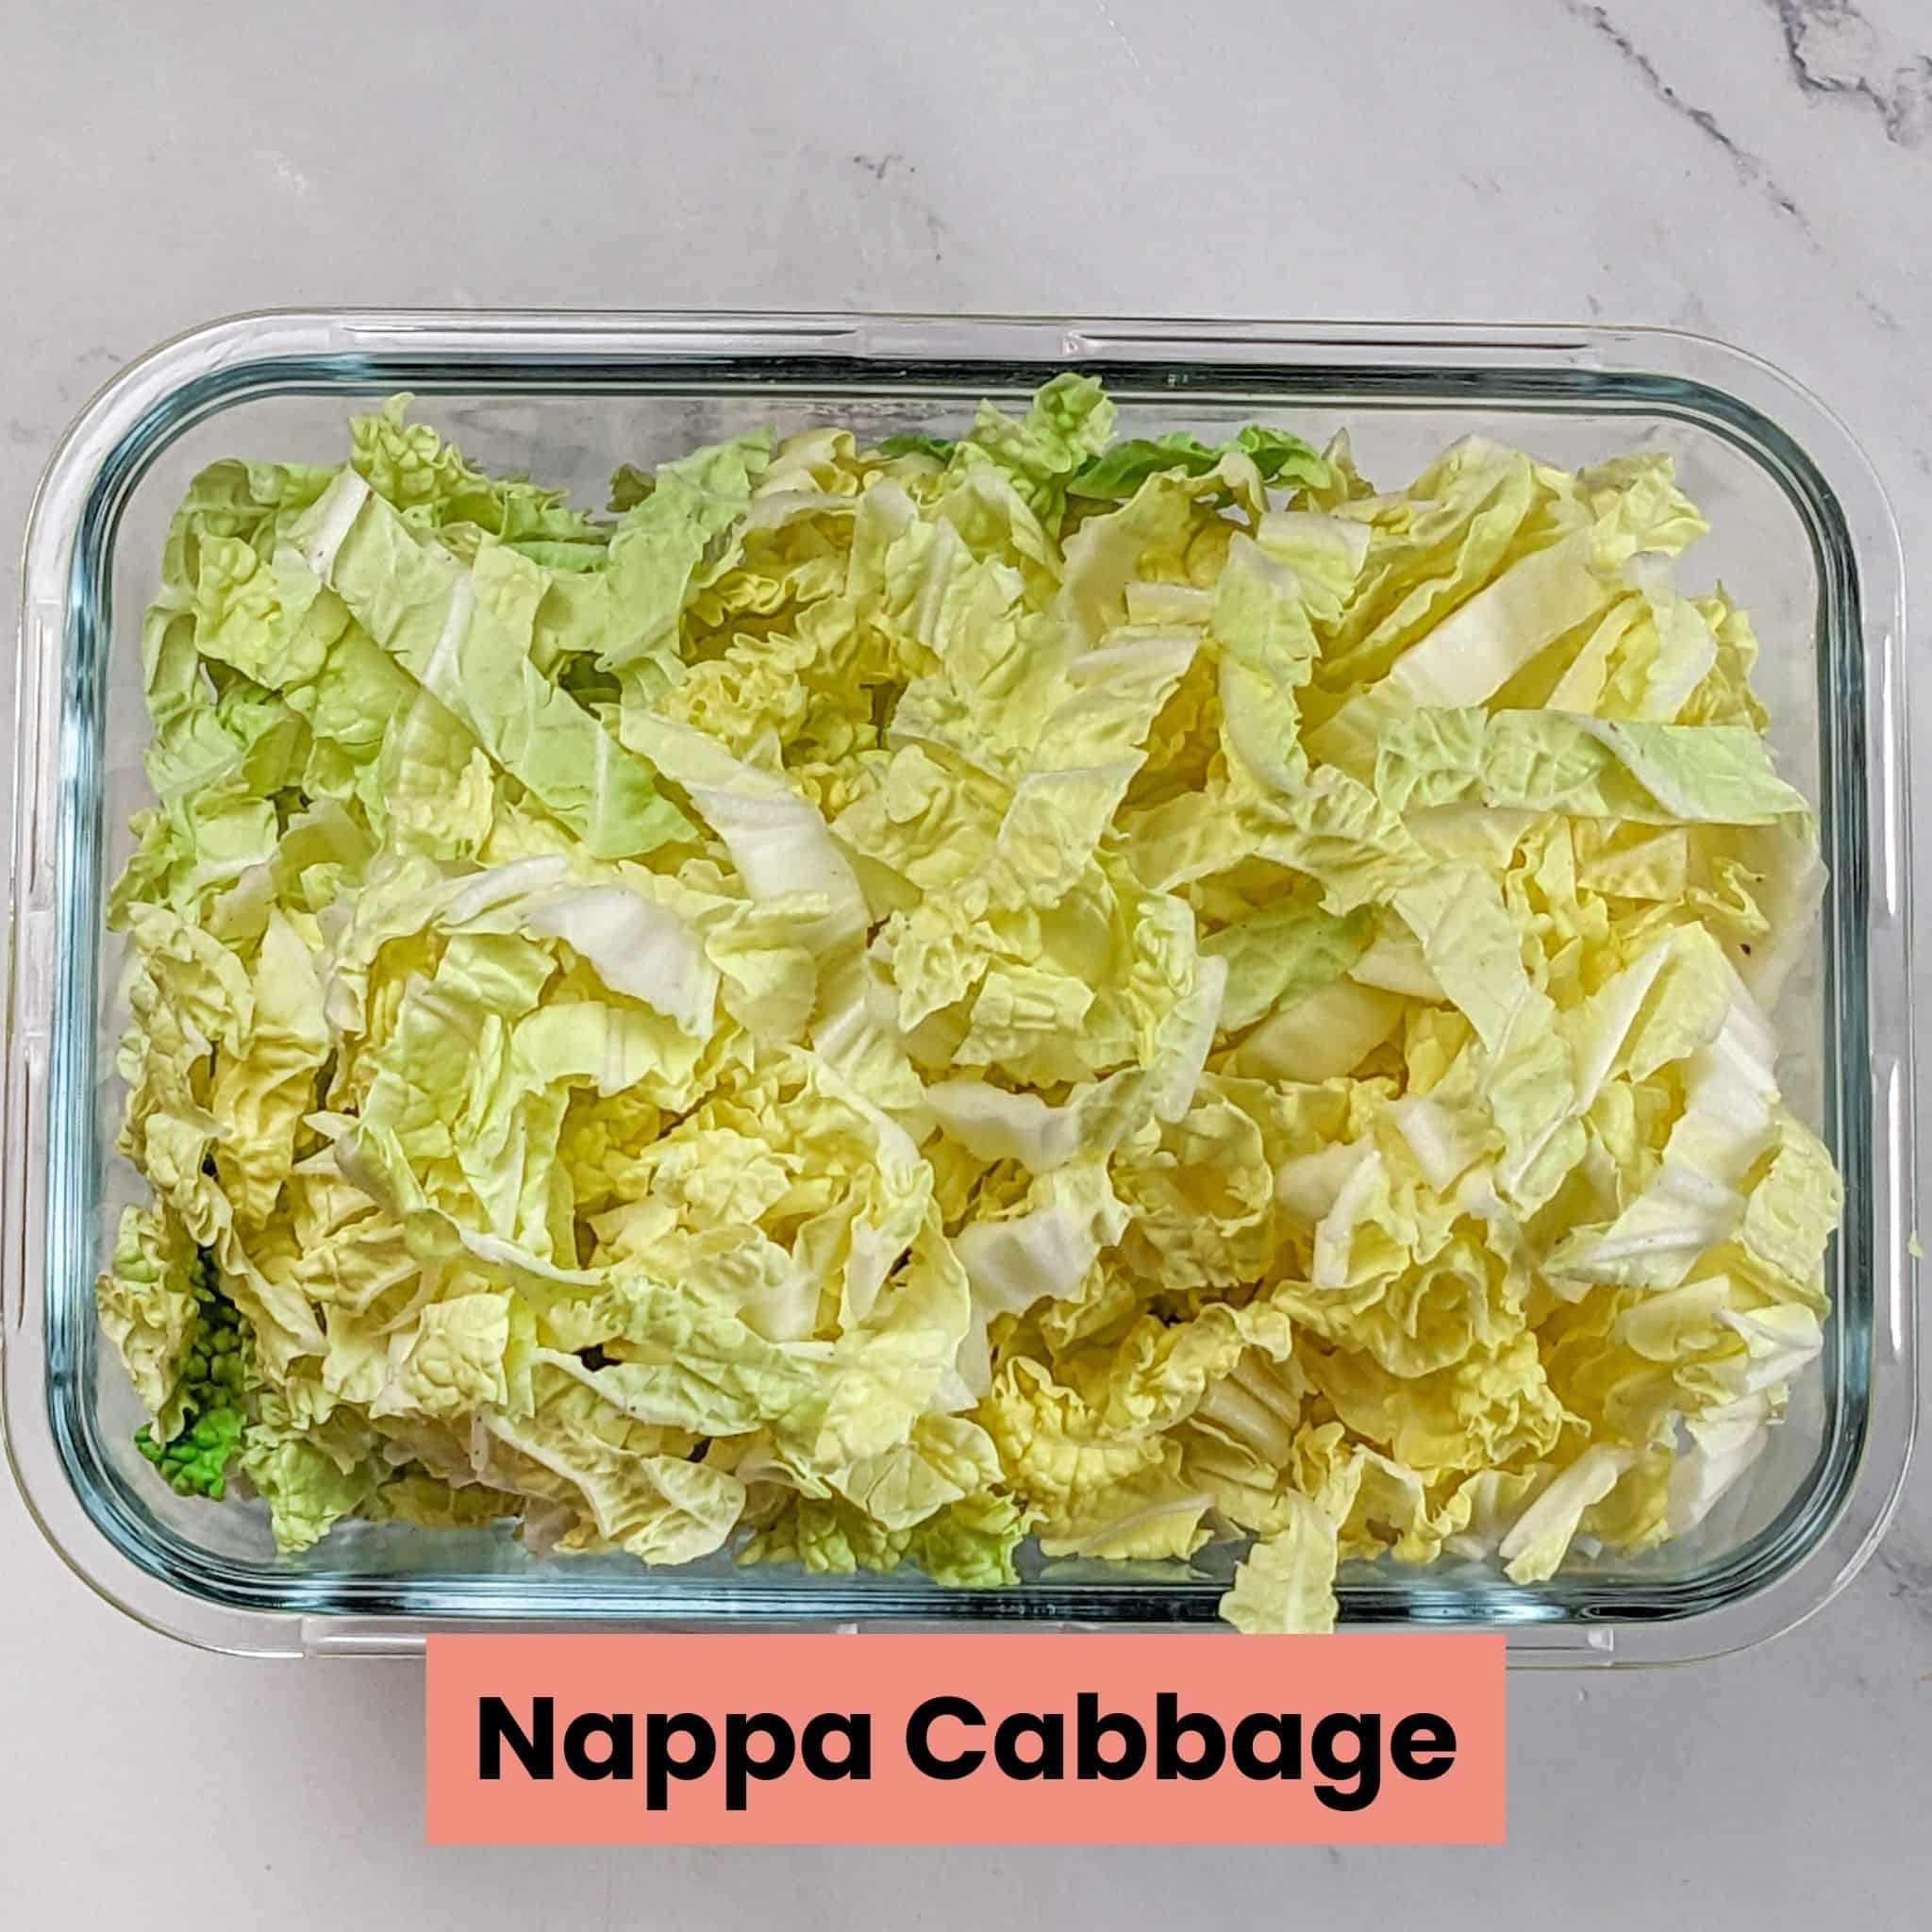 nappa cabbage strips in a deep rectangle glass container.